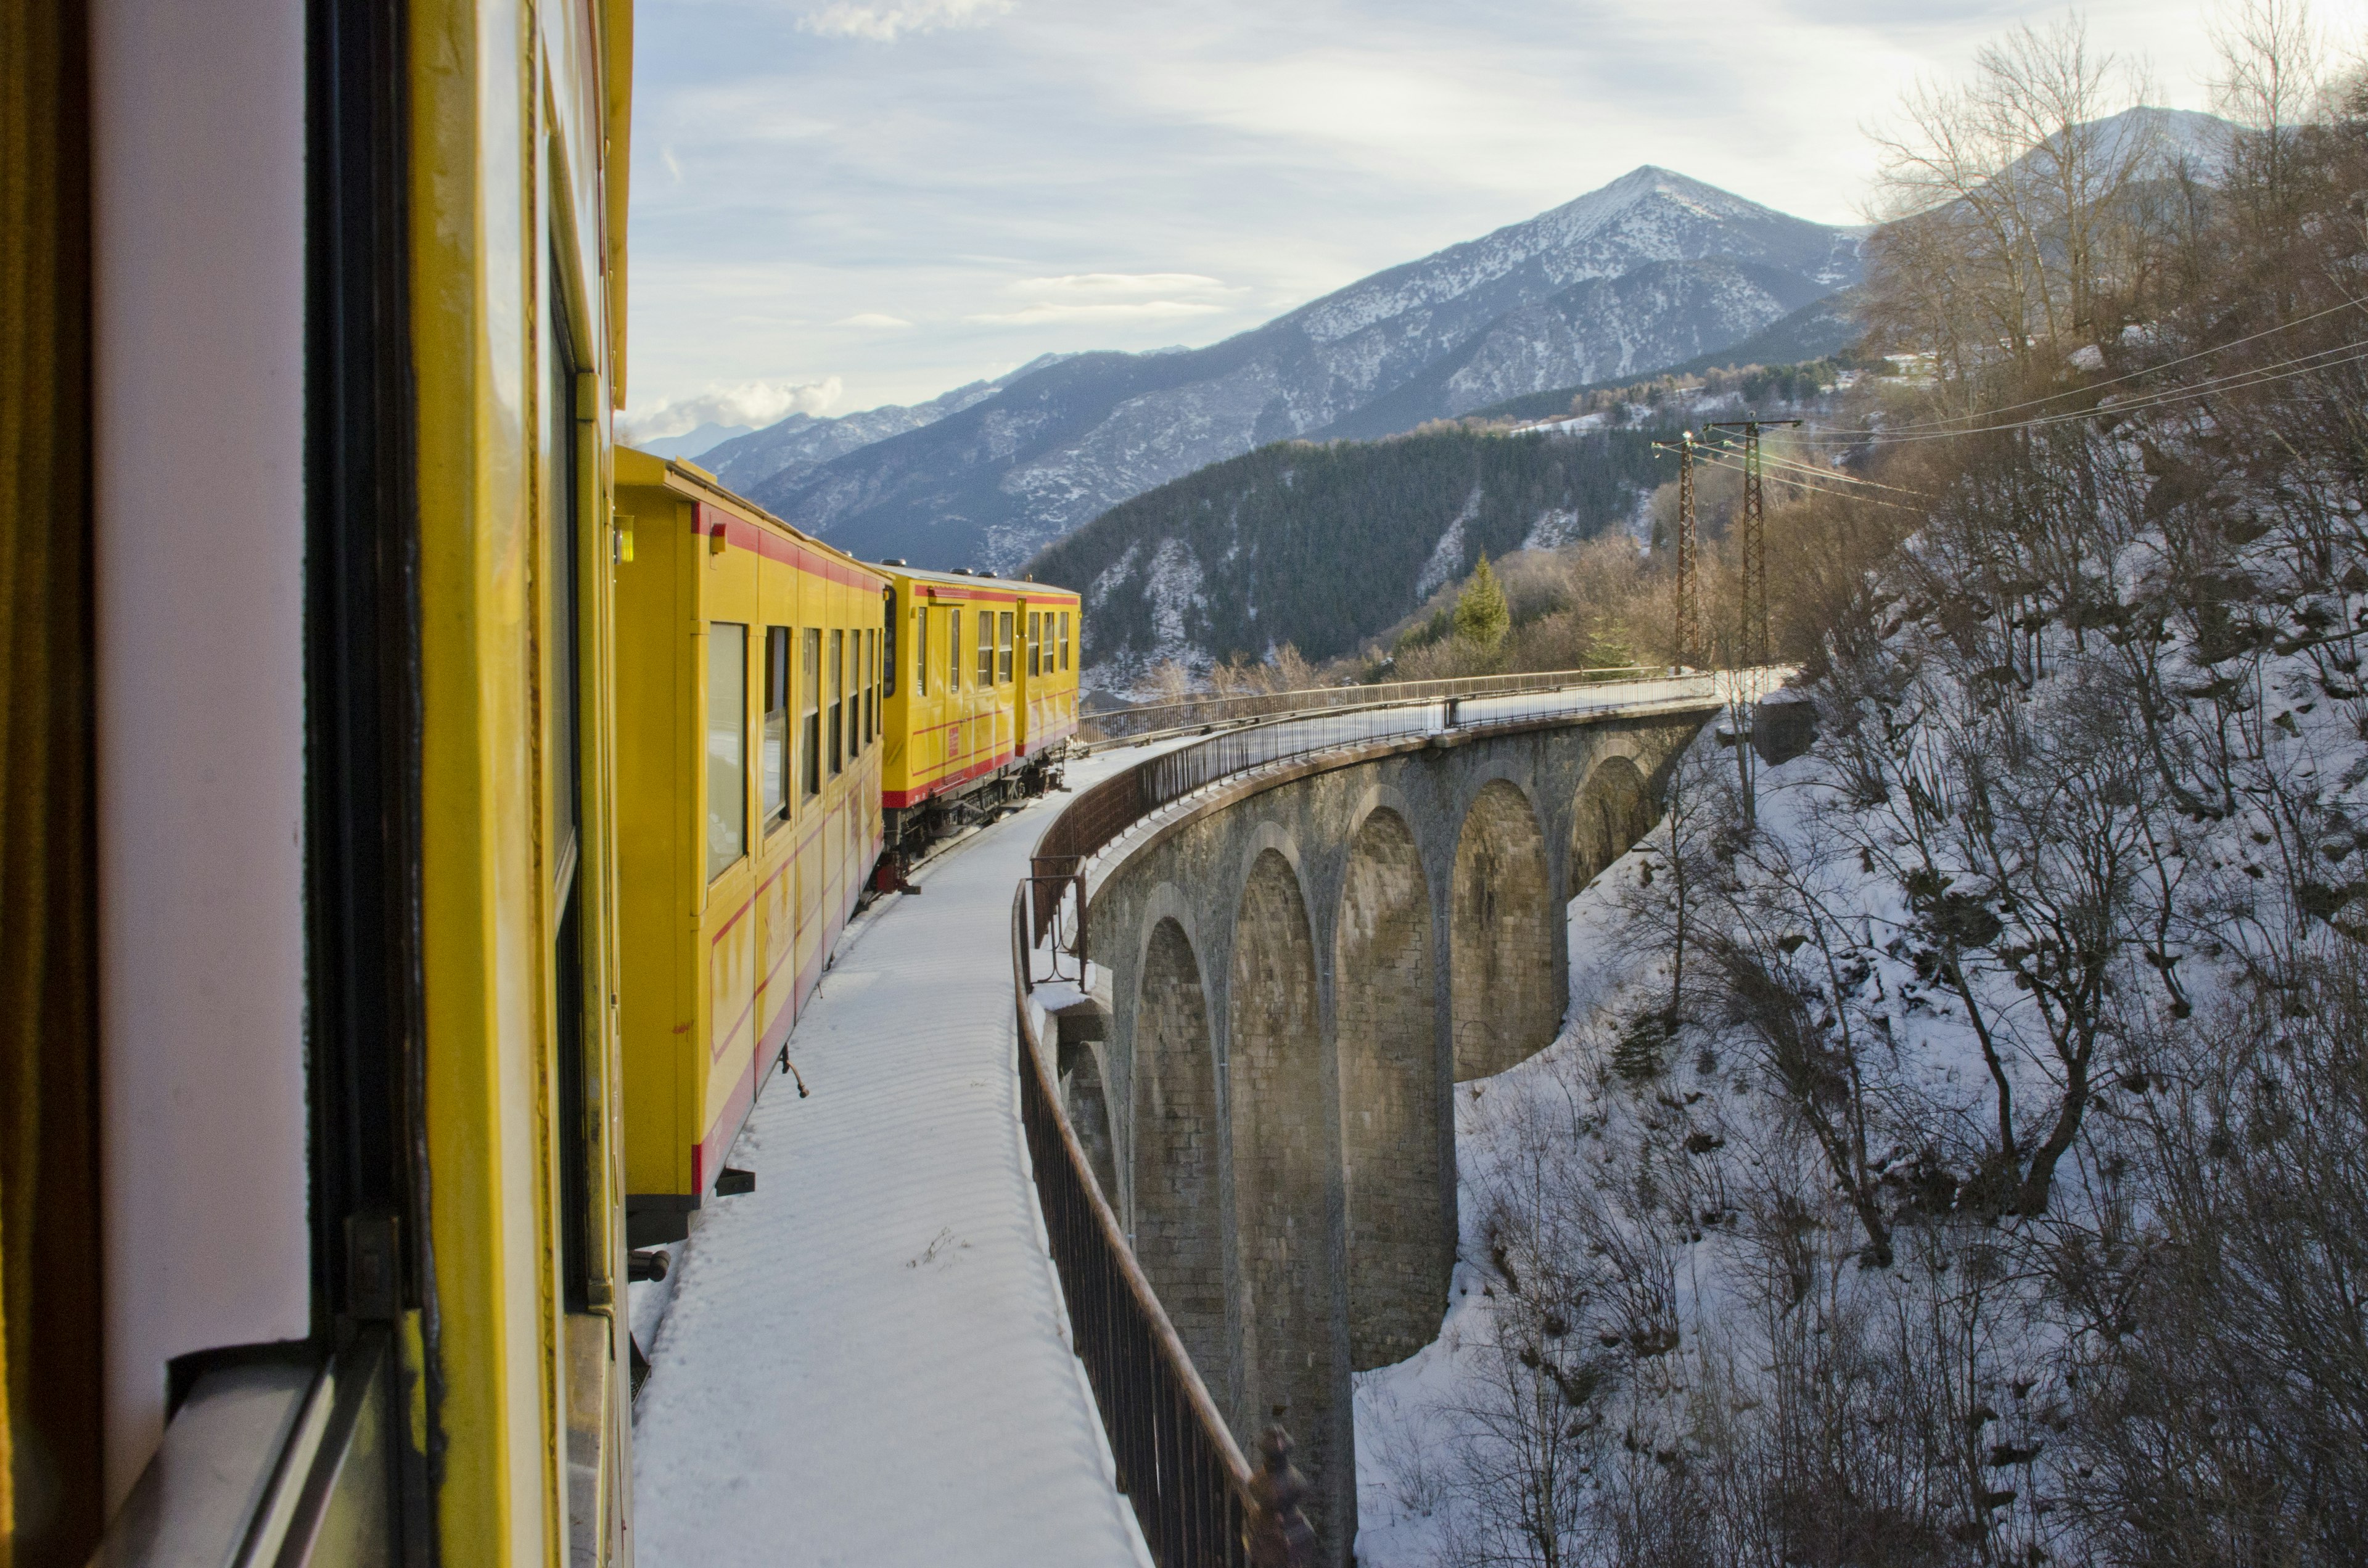 Train jaune passing on a bridge in a snowy landscape at the French Pyrenees